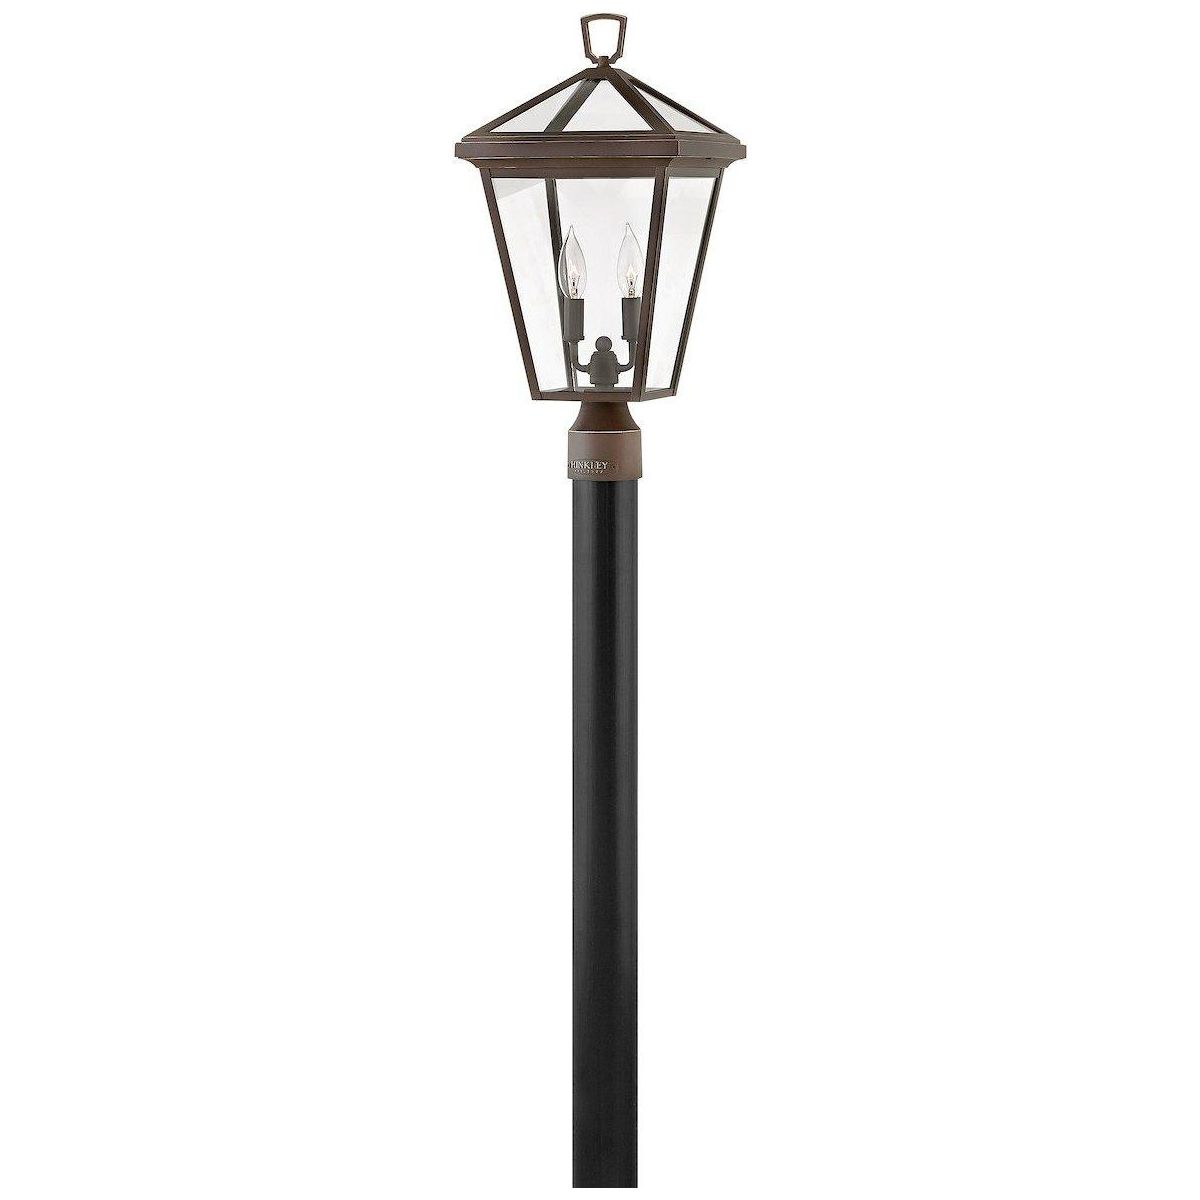 Hinkley - Alford Place Outdoor Post Light - Lights Canada